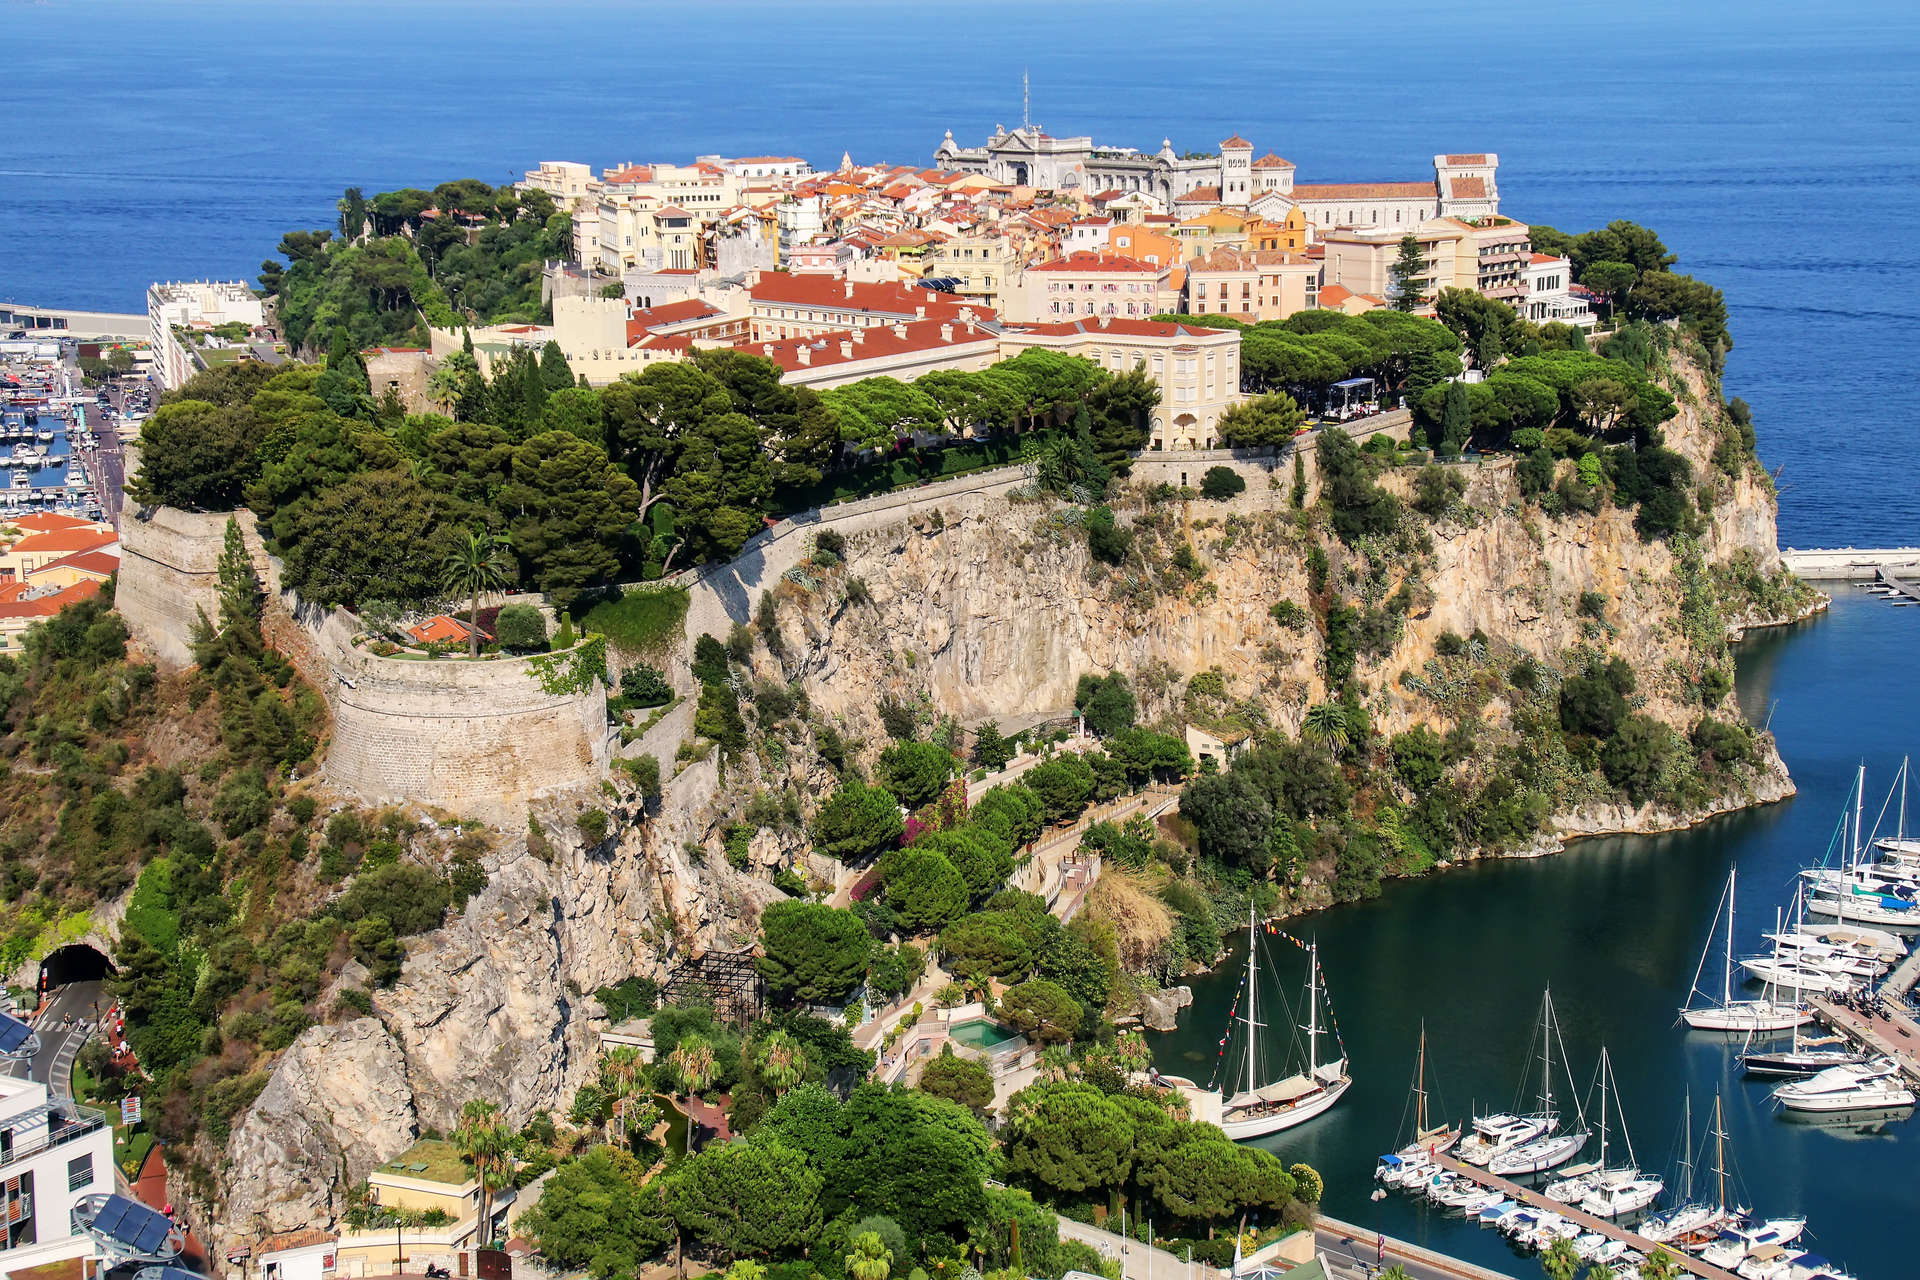 Accessed via elevator or stairs, the Le Rocher headland is the oldest and most atmospheric part of Monaco